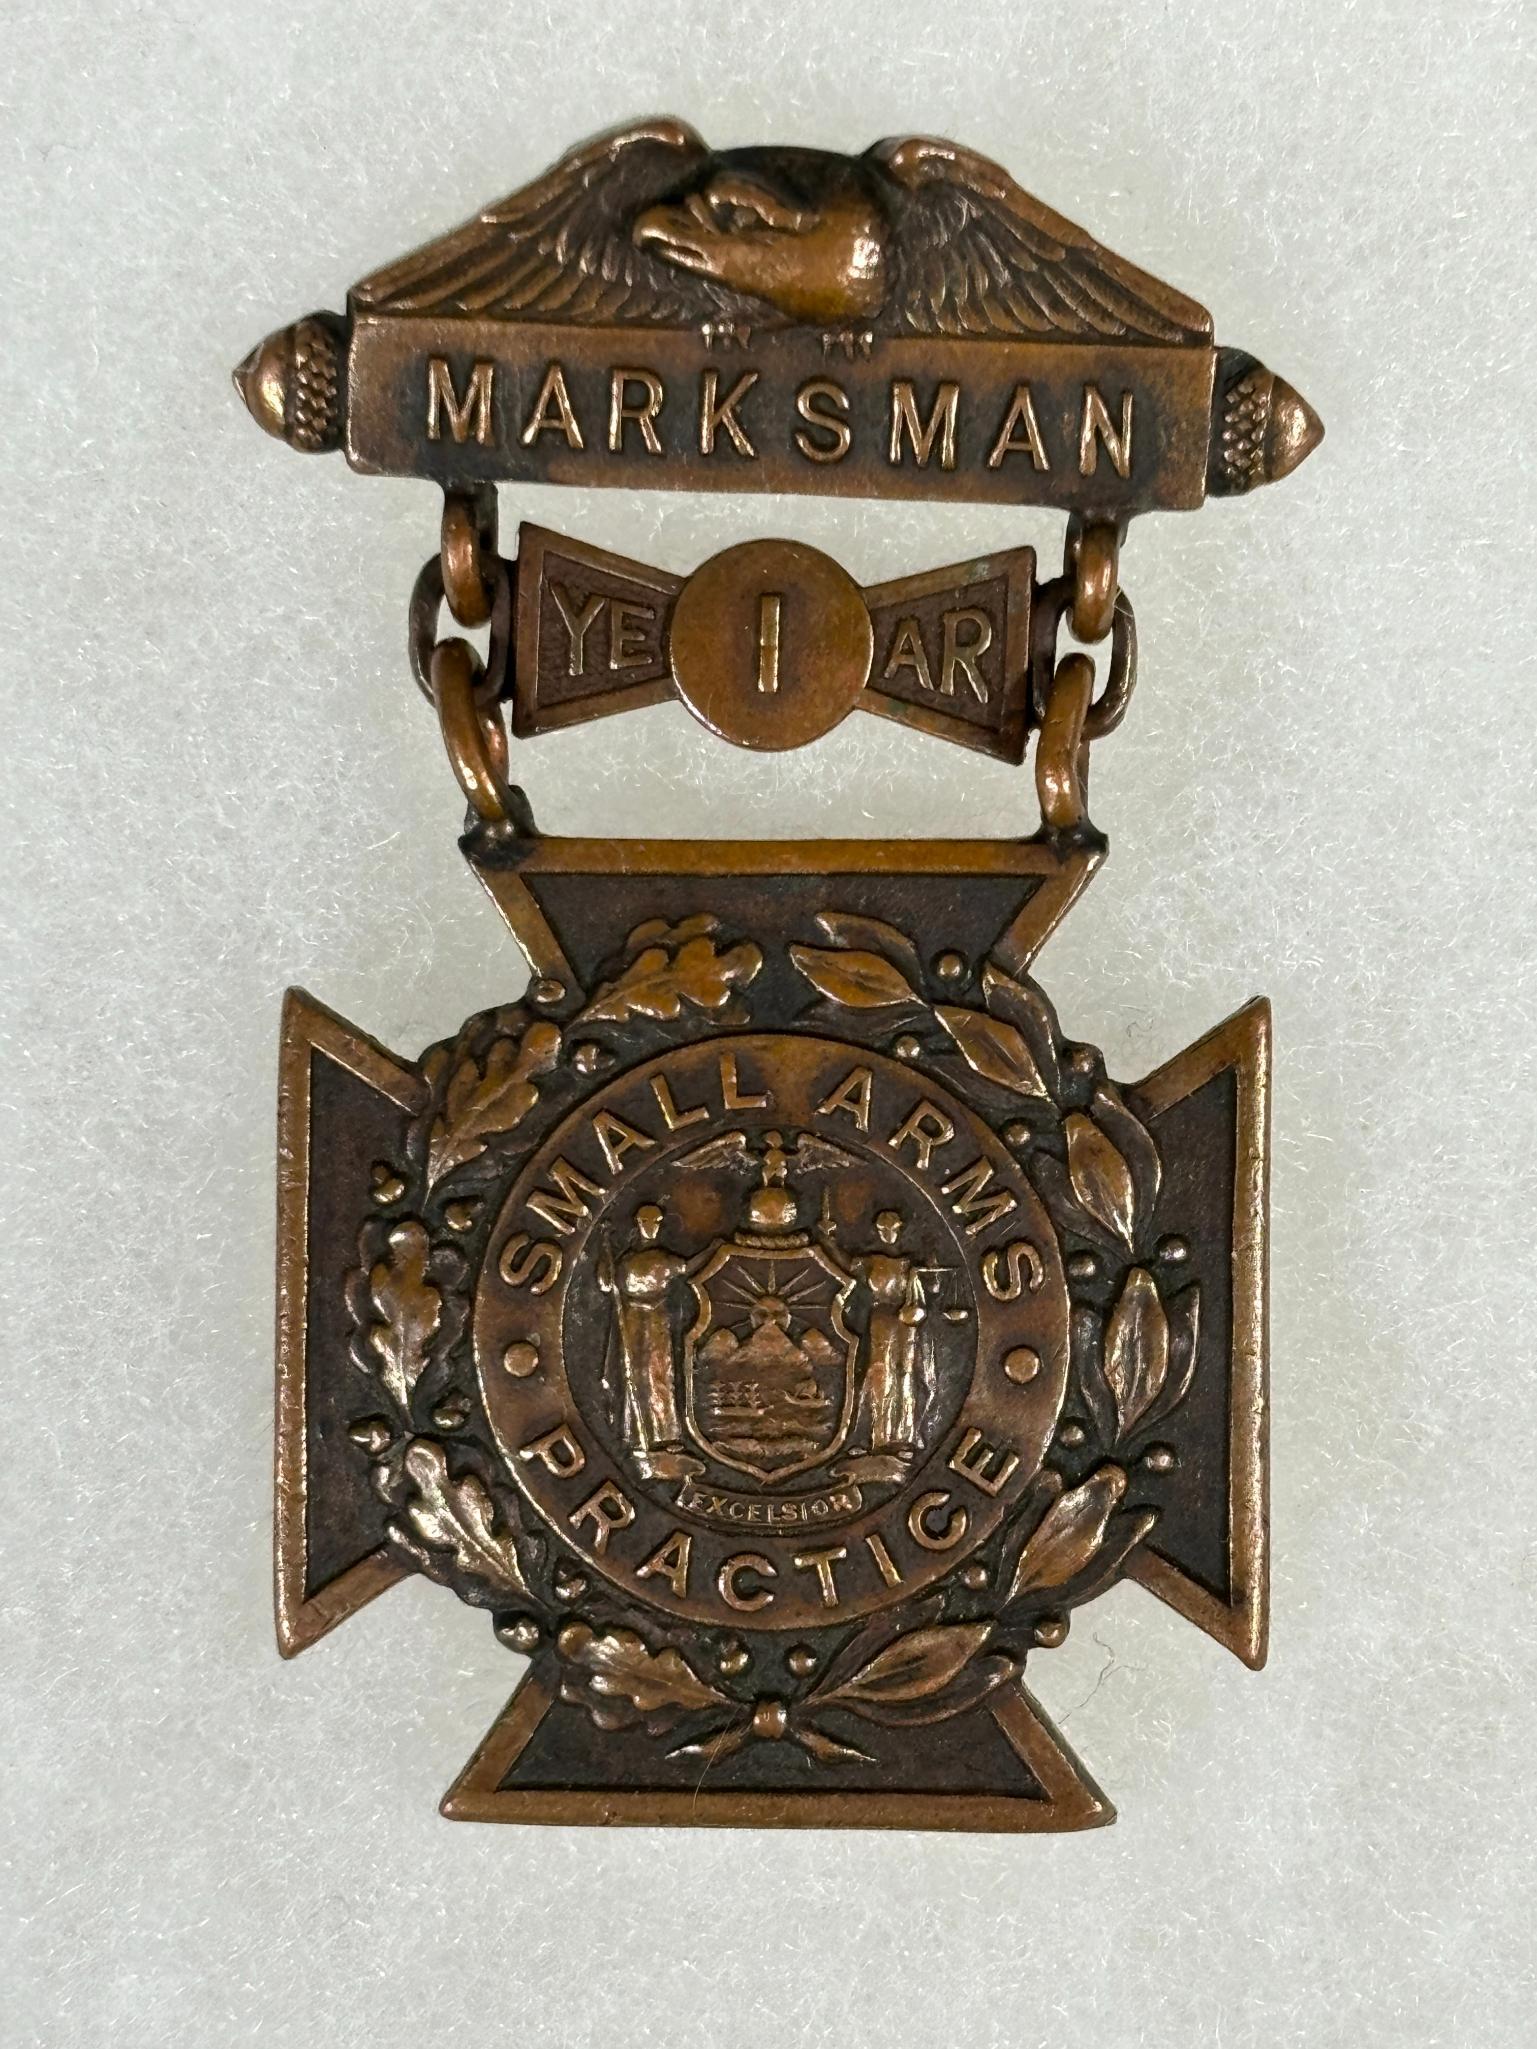 SPAN-AM NEW YORK NATIONAL GUARD MARKSMAN MEDALS 4 MADE BY TIFFANY & COMPANY